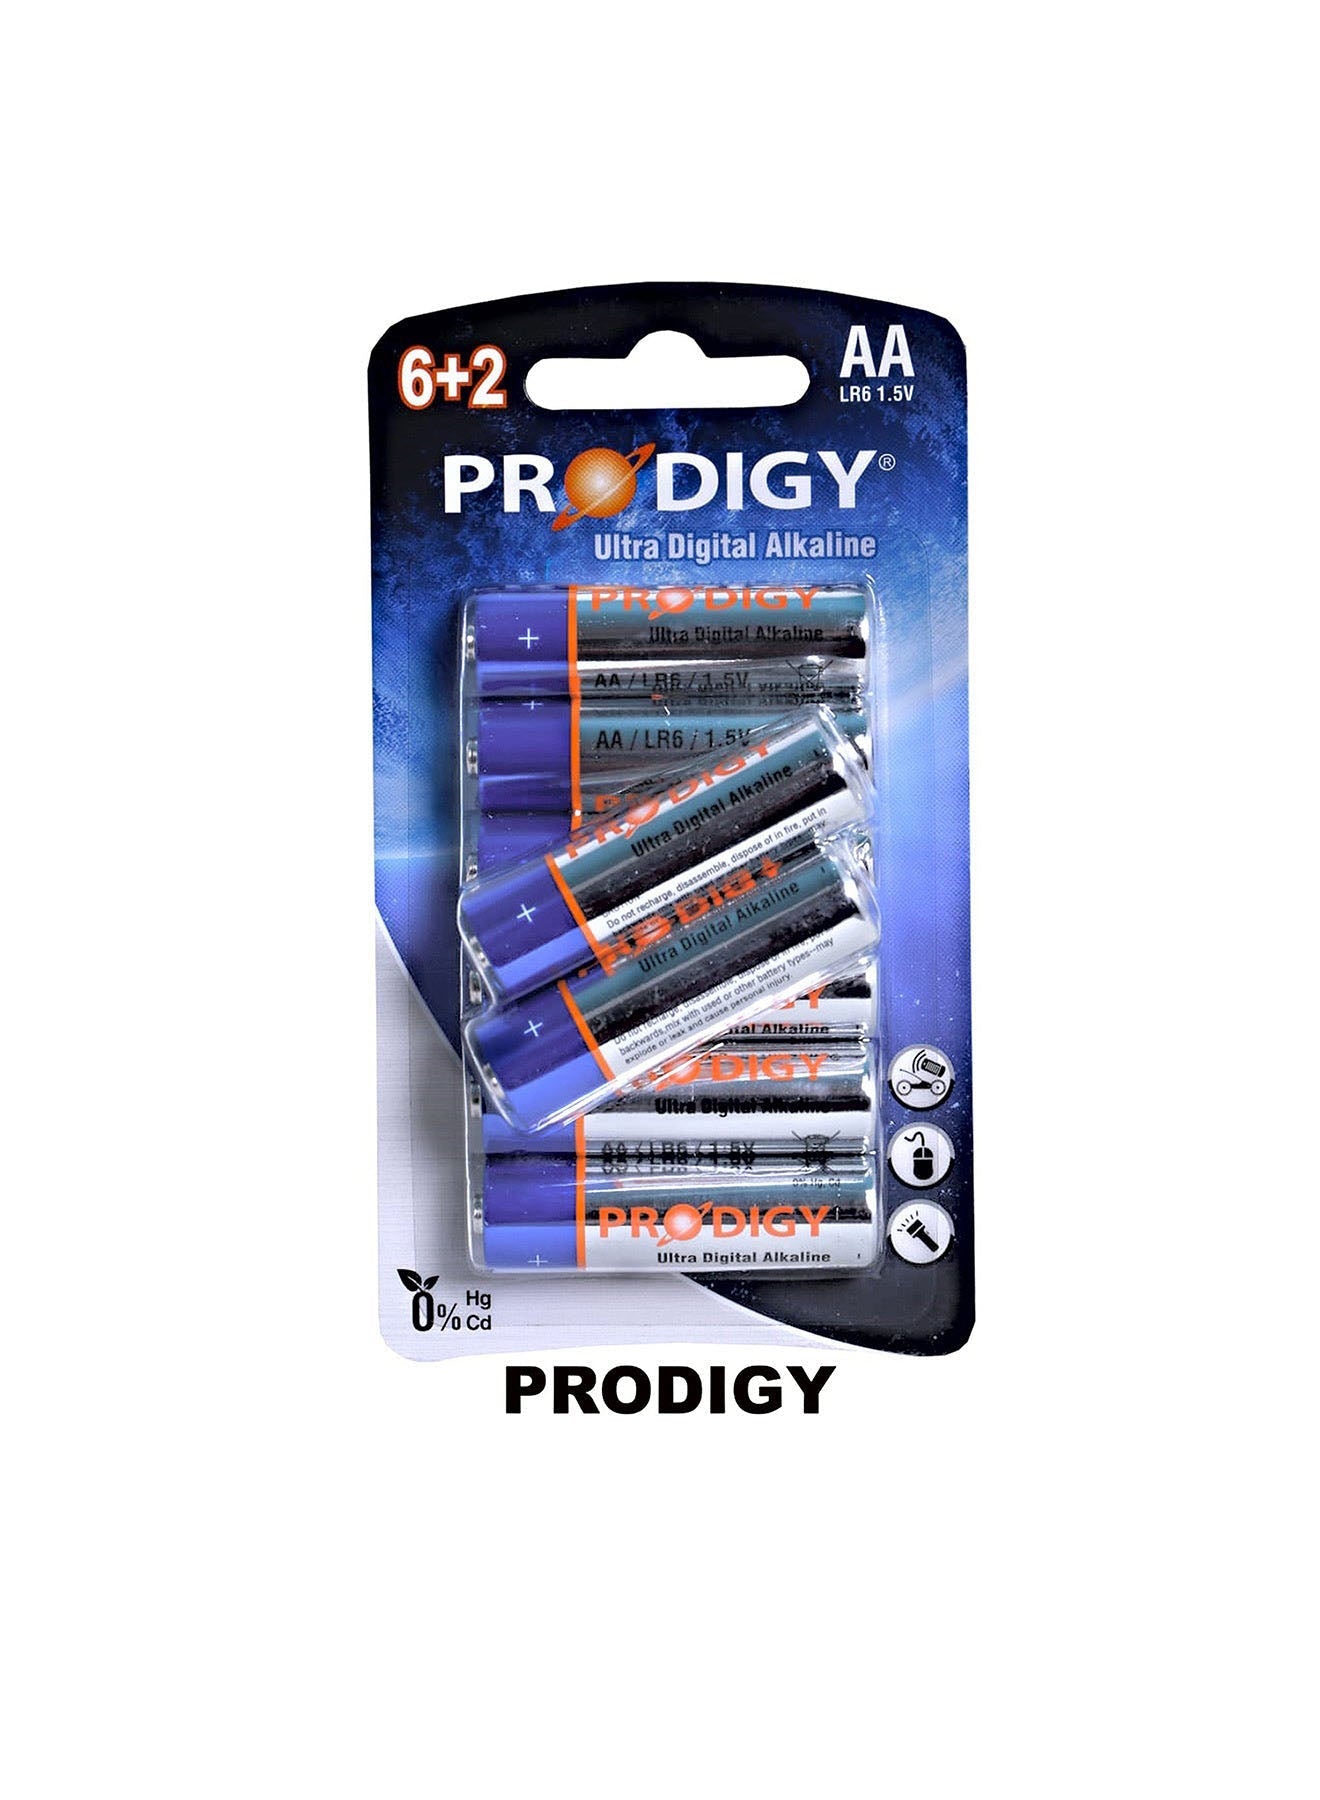 Prodigy Alkaline LR6UD 62B AA8 Value Pack of 12 